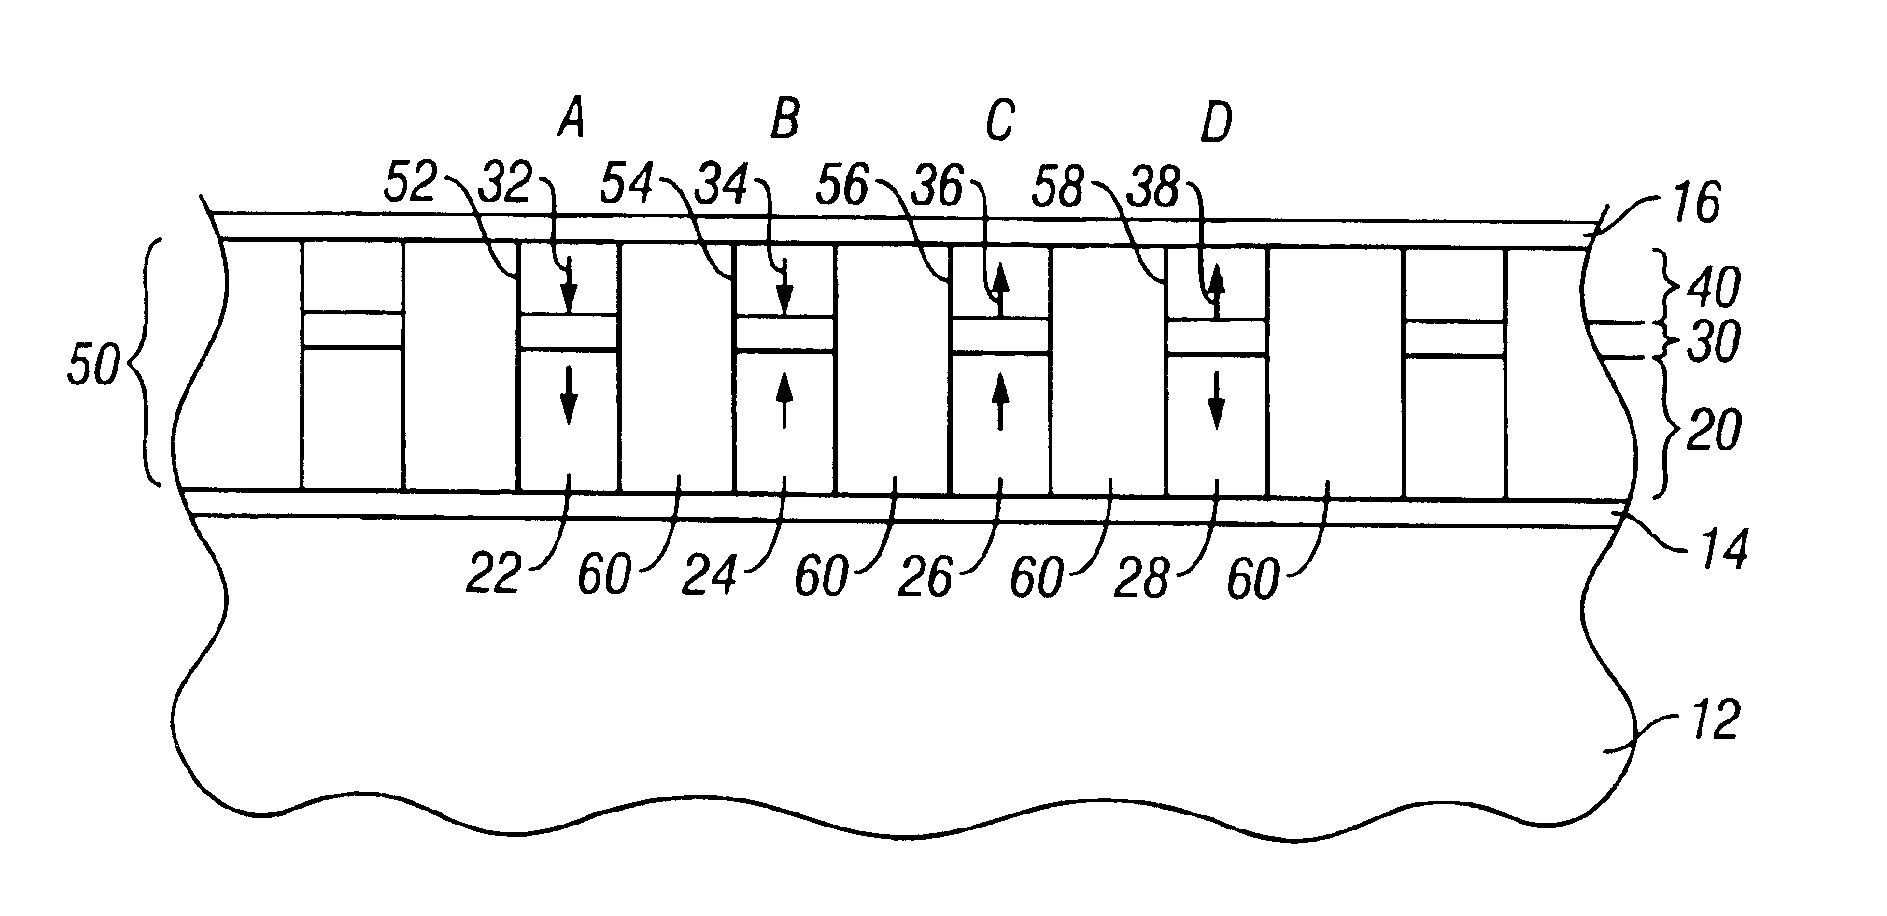 Magnetic recording system with patterned multilevel perpendicular magnetic recording